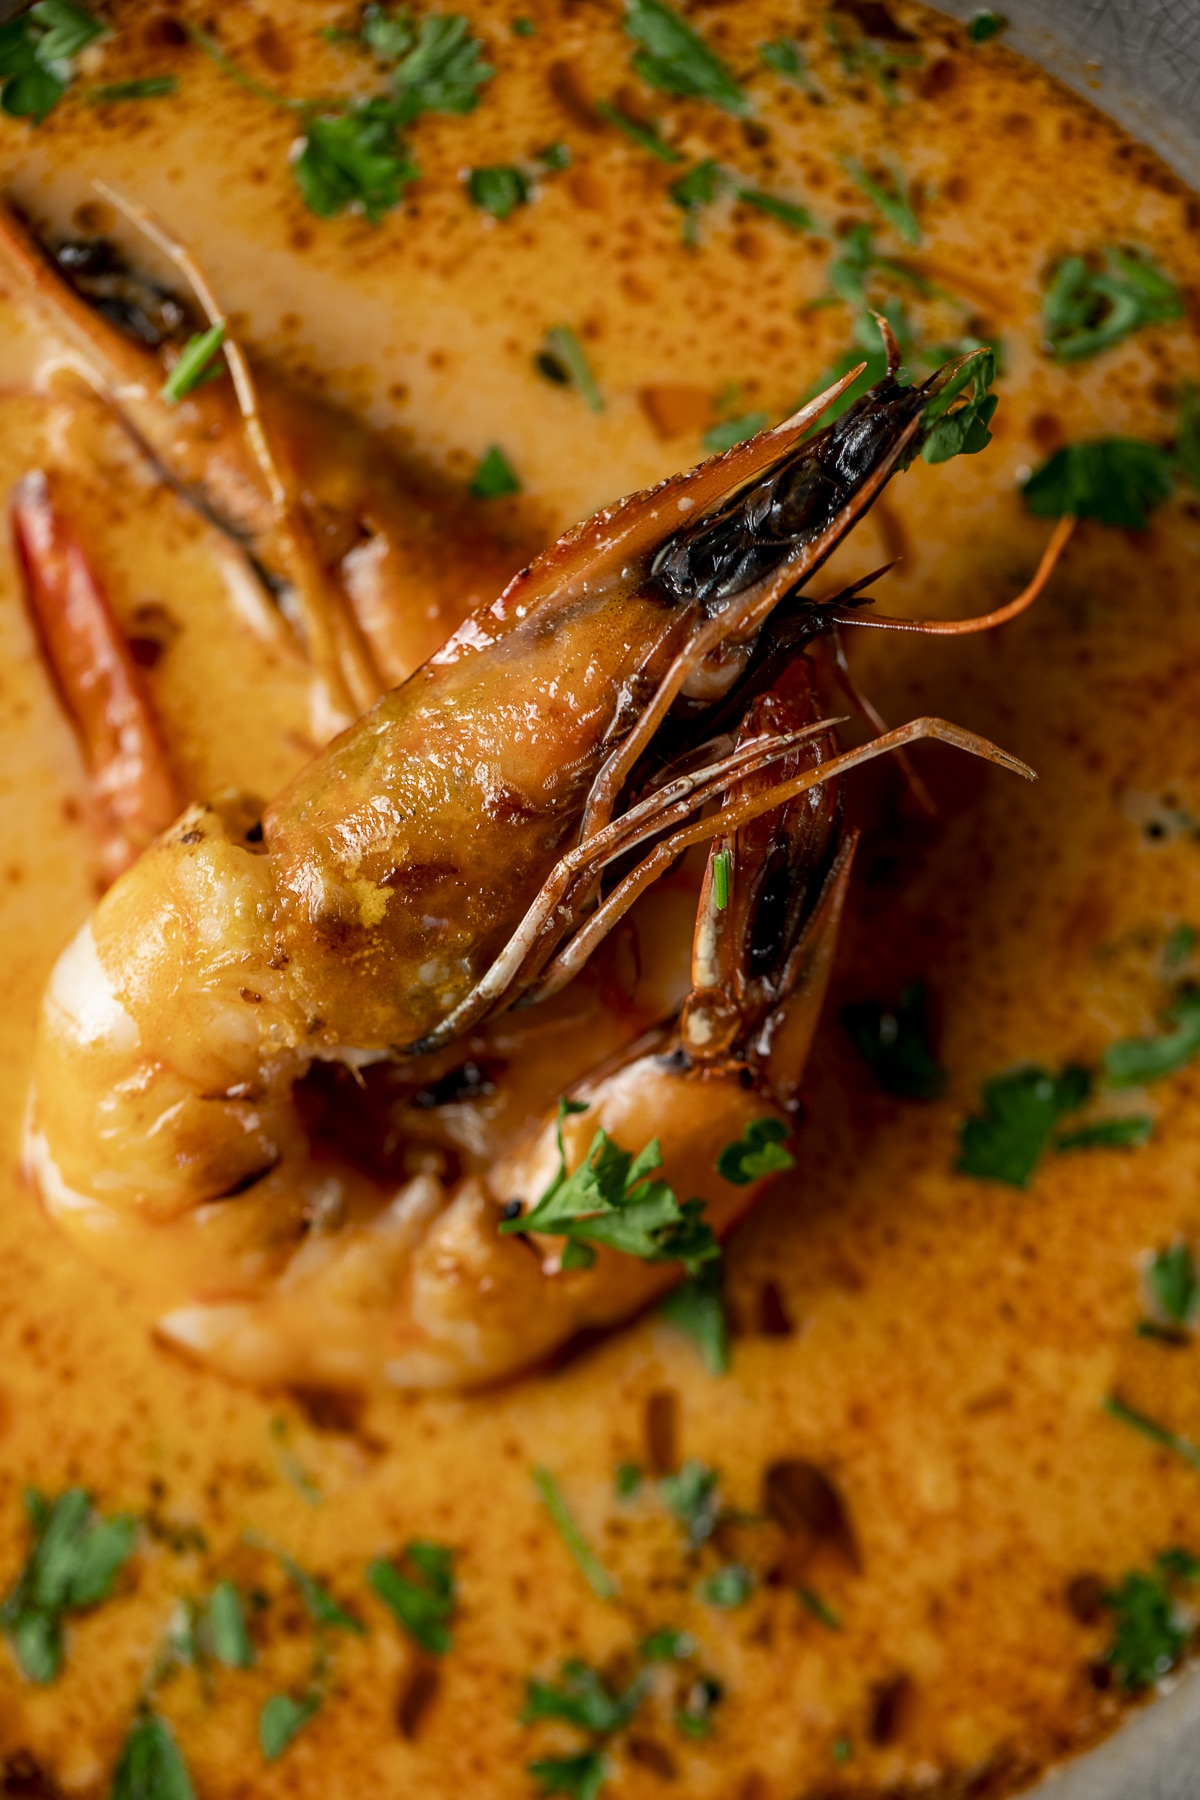 Close up view of a prawn on top of a bowl of bisque.